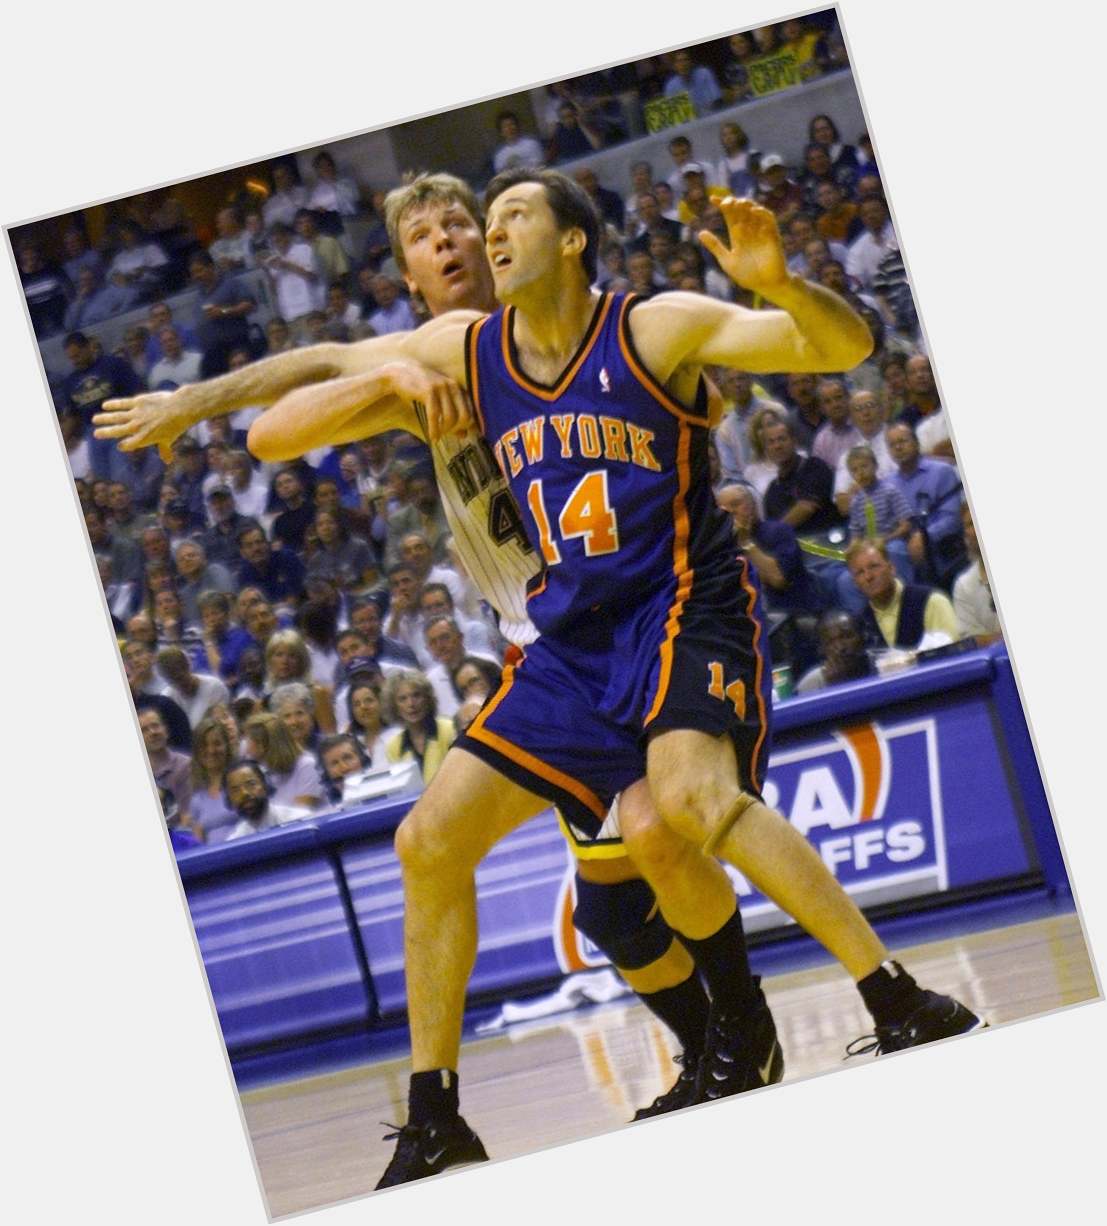 Chris Dudley hairstyle 3